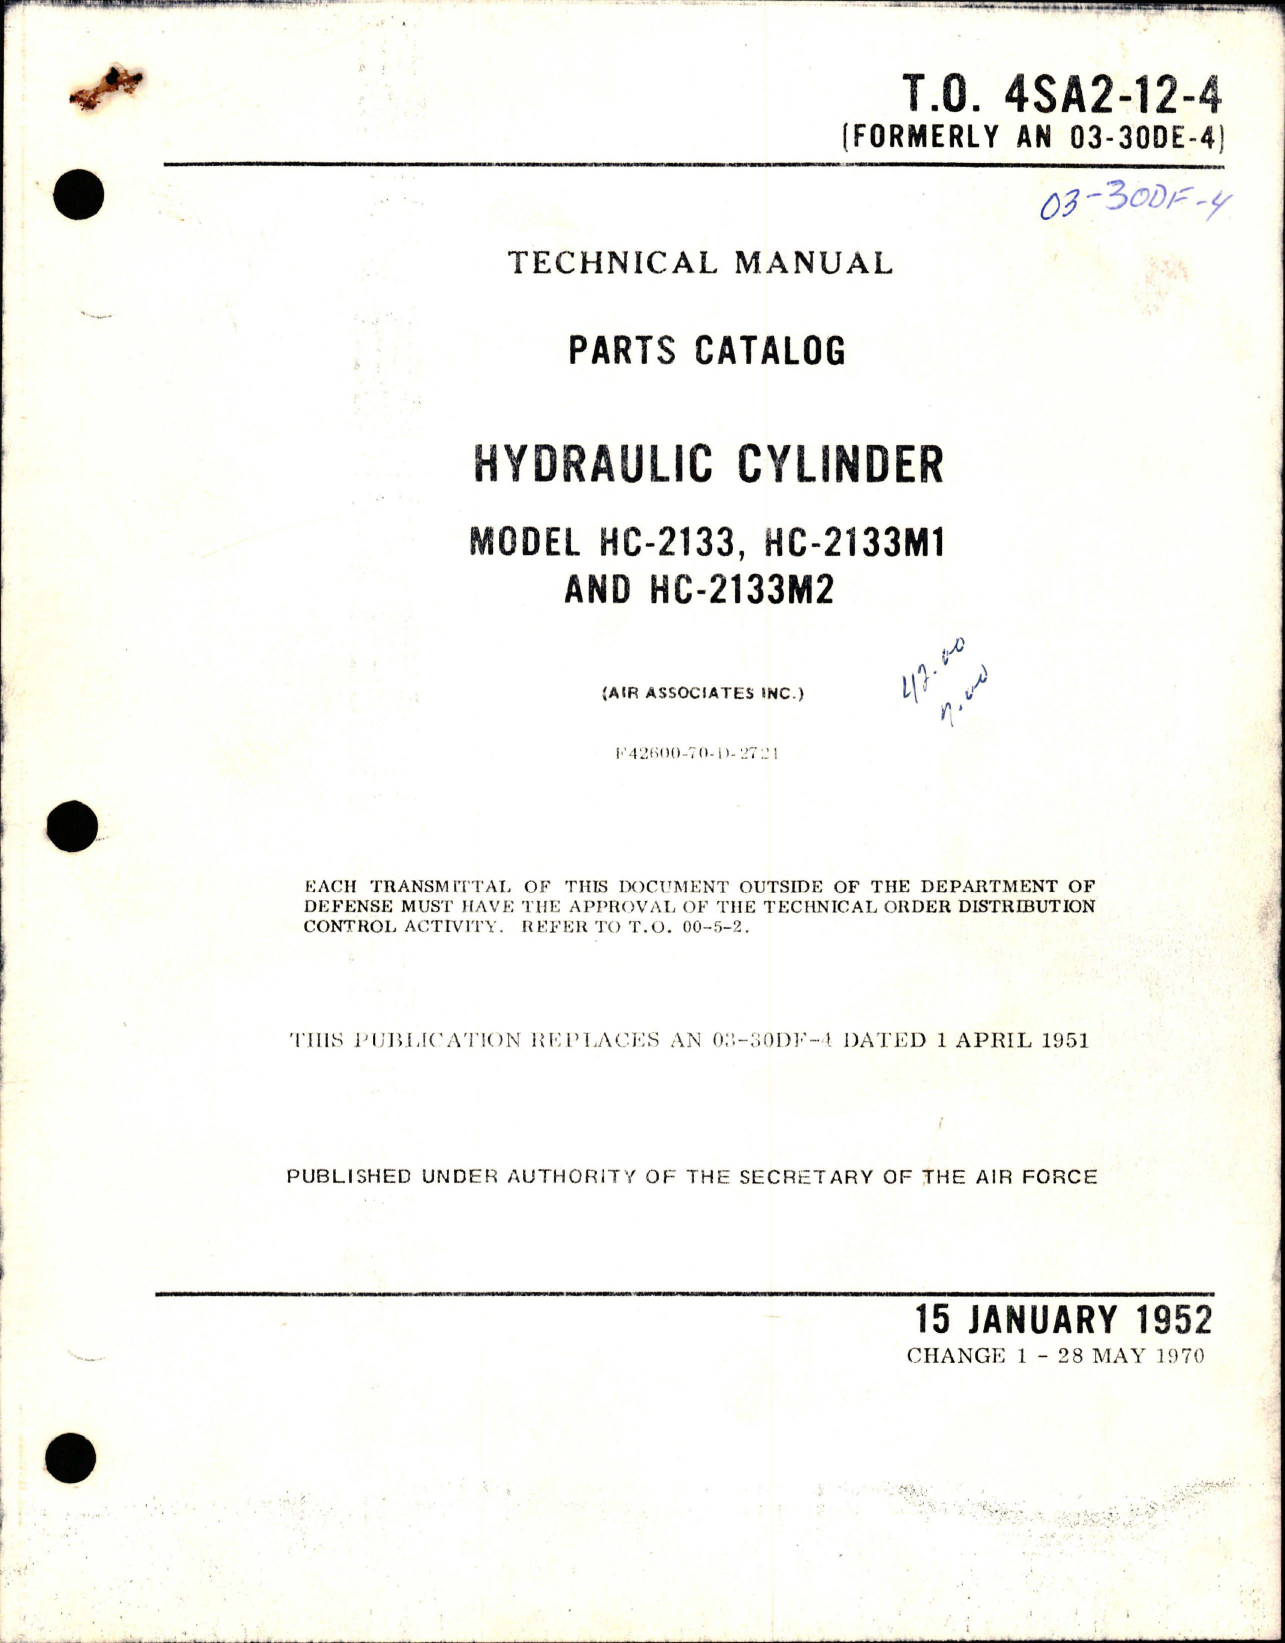 Sample page 1 from AirCorps Library document: Parts Catalog for Hydraulic Cylinder - Models HC-2133, HC-2133M1, and HC-2133M2